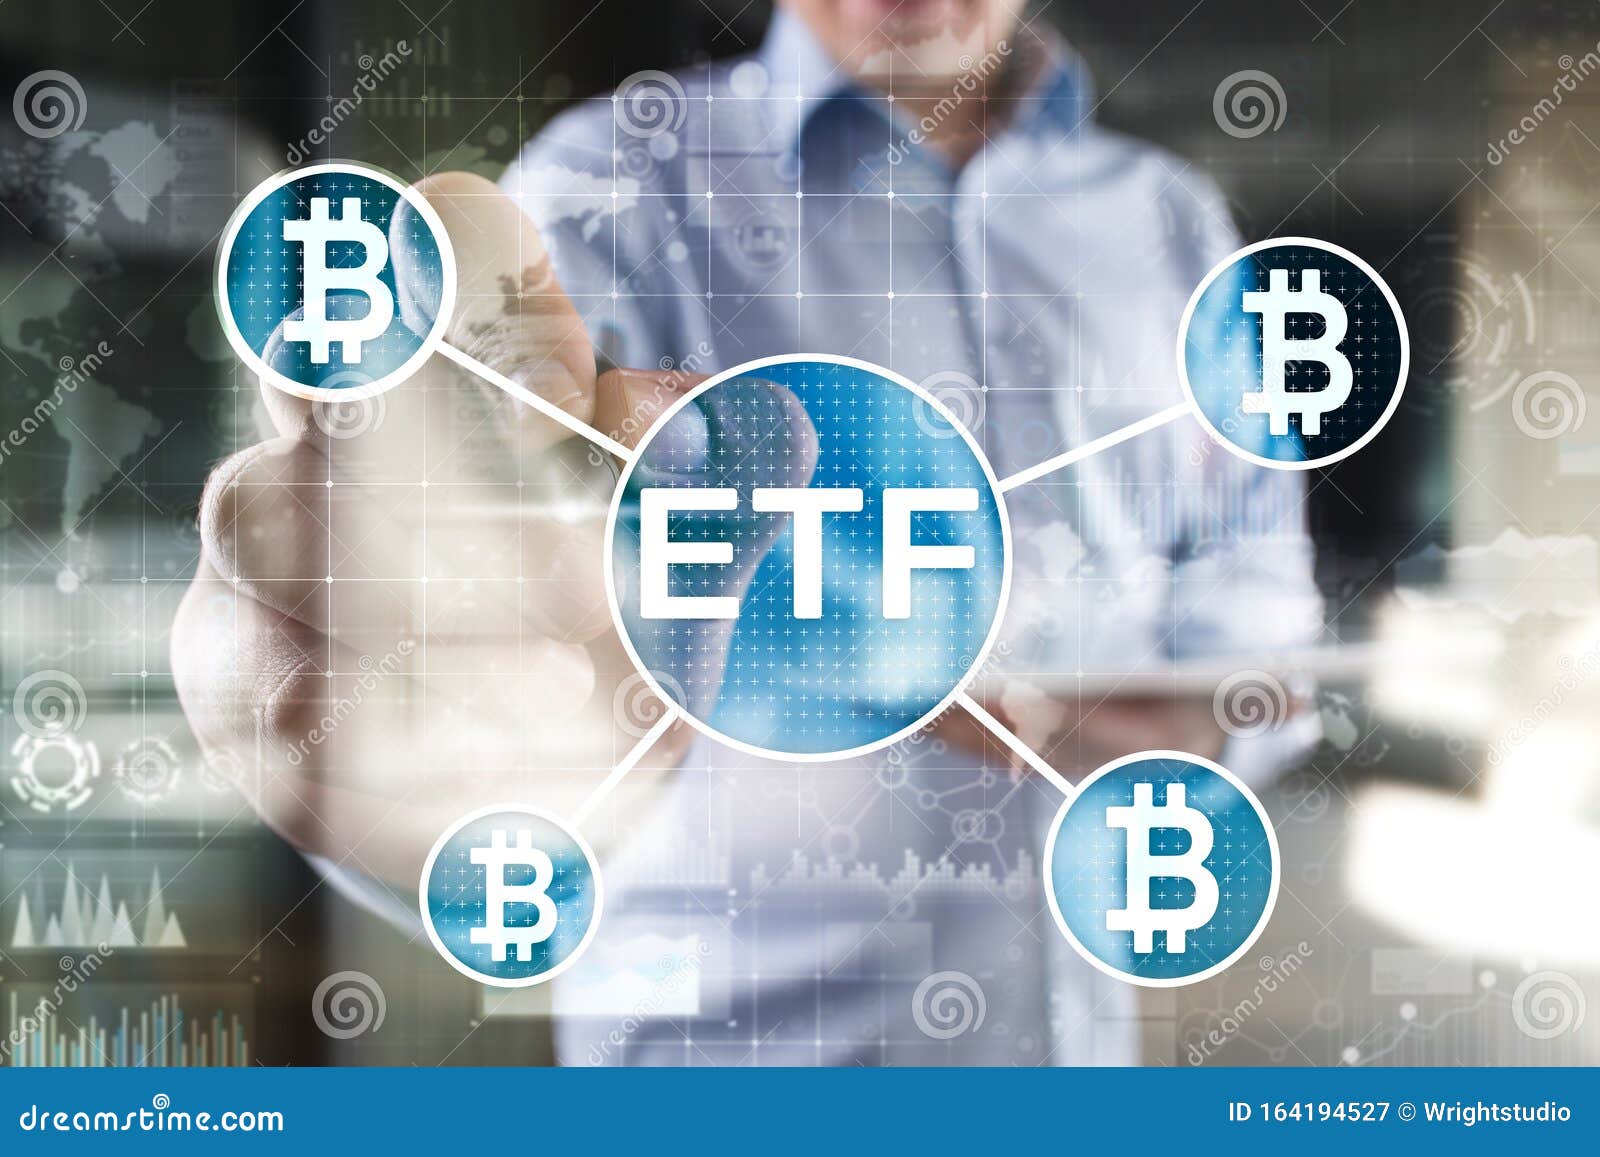 bitcoin exchange traded fund etf